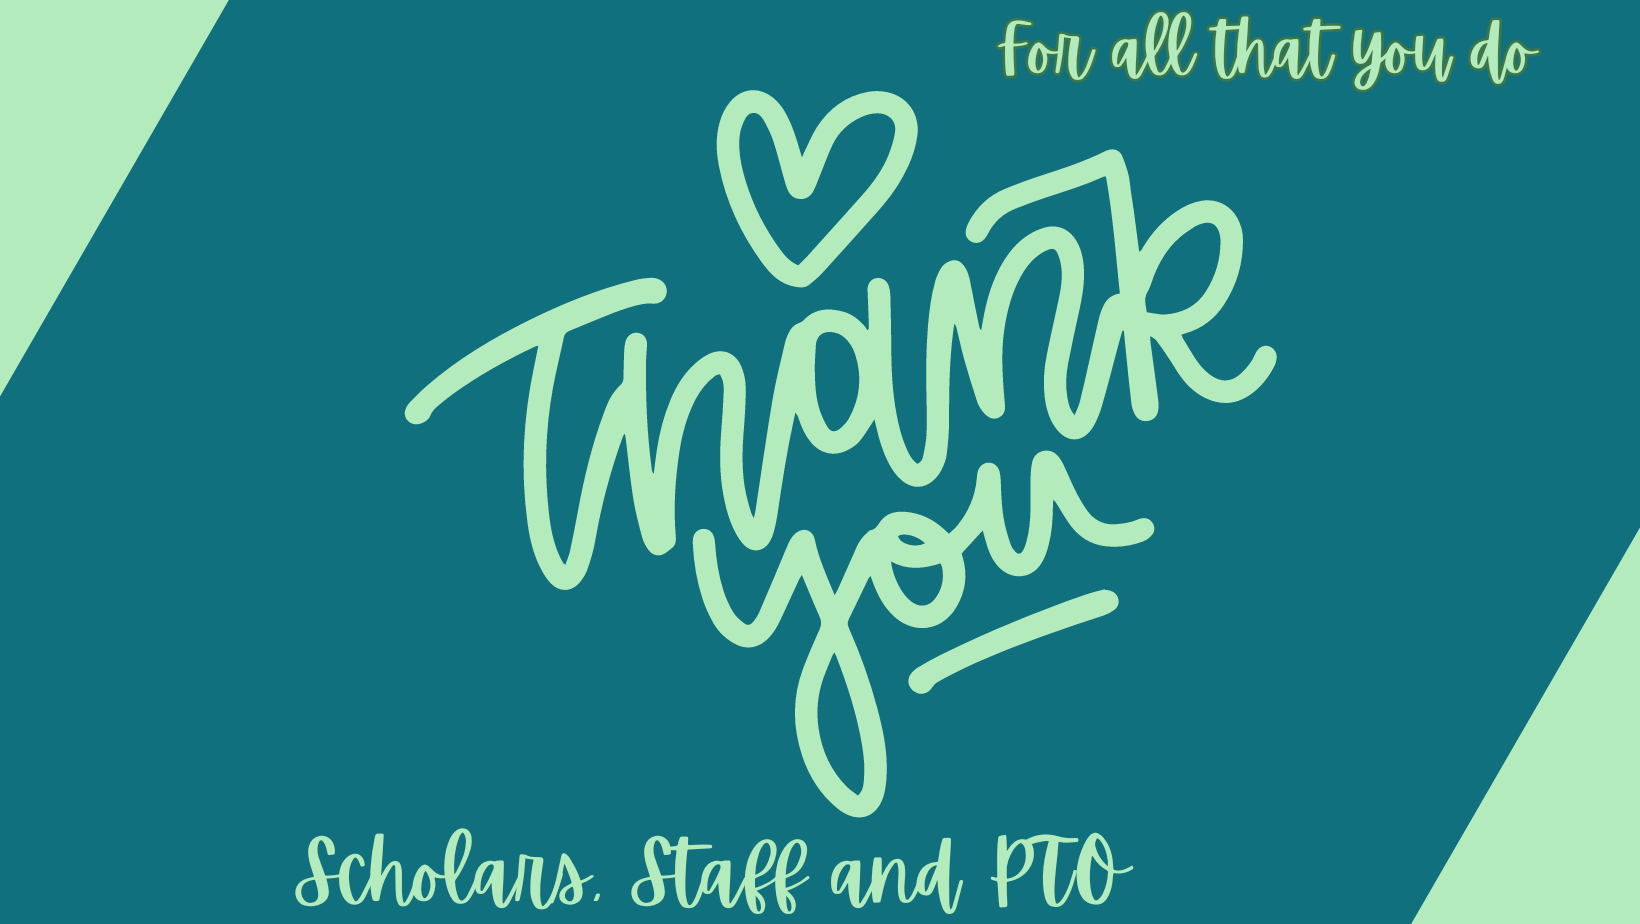 Scholars-Staff-and-PTO